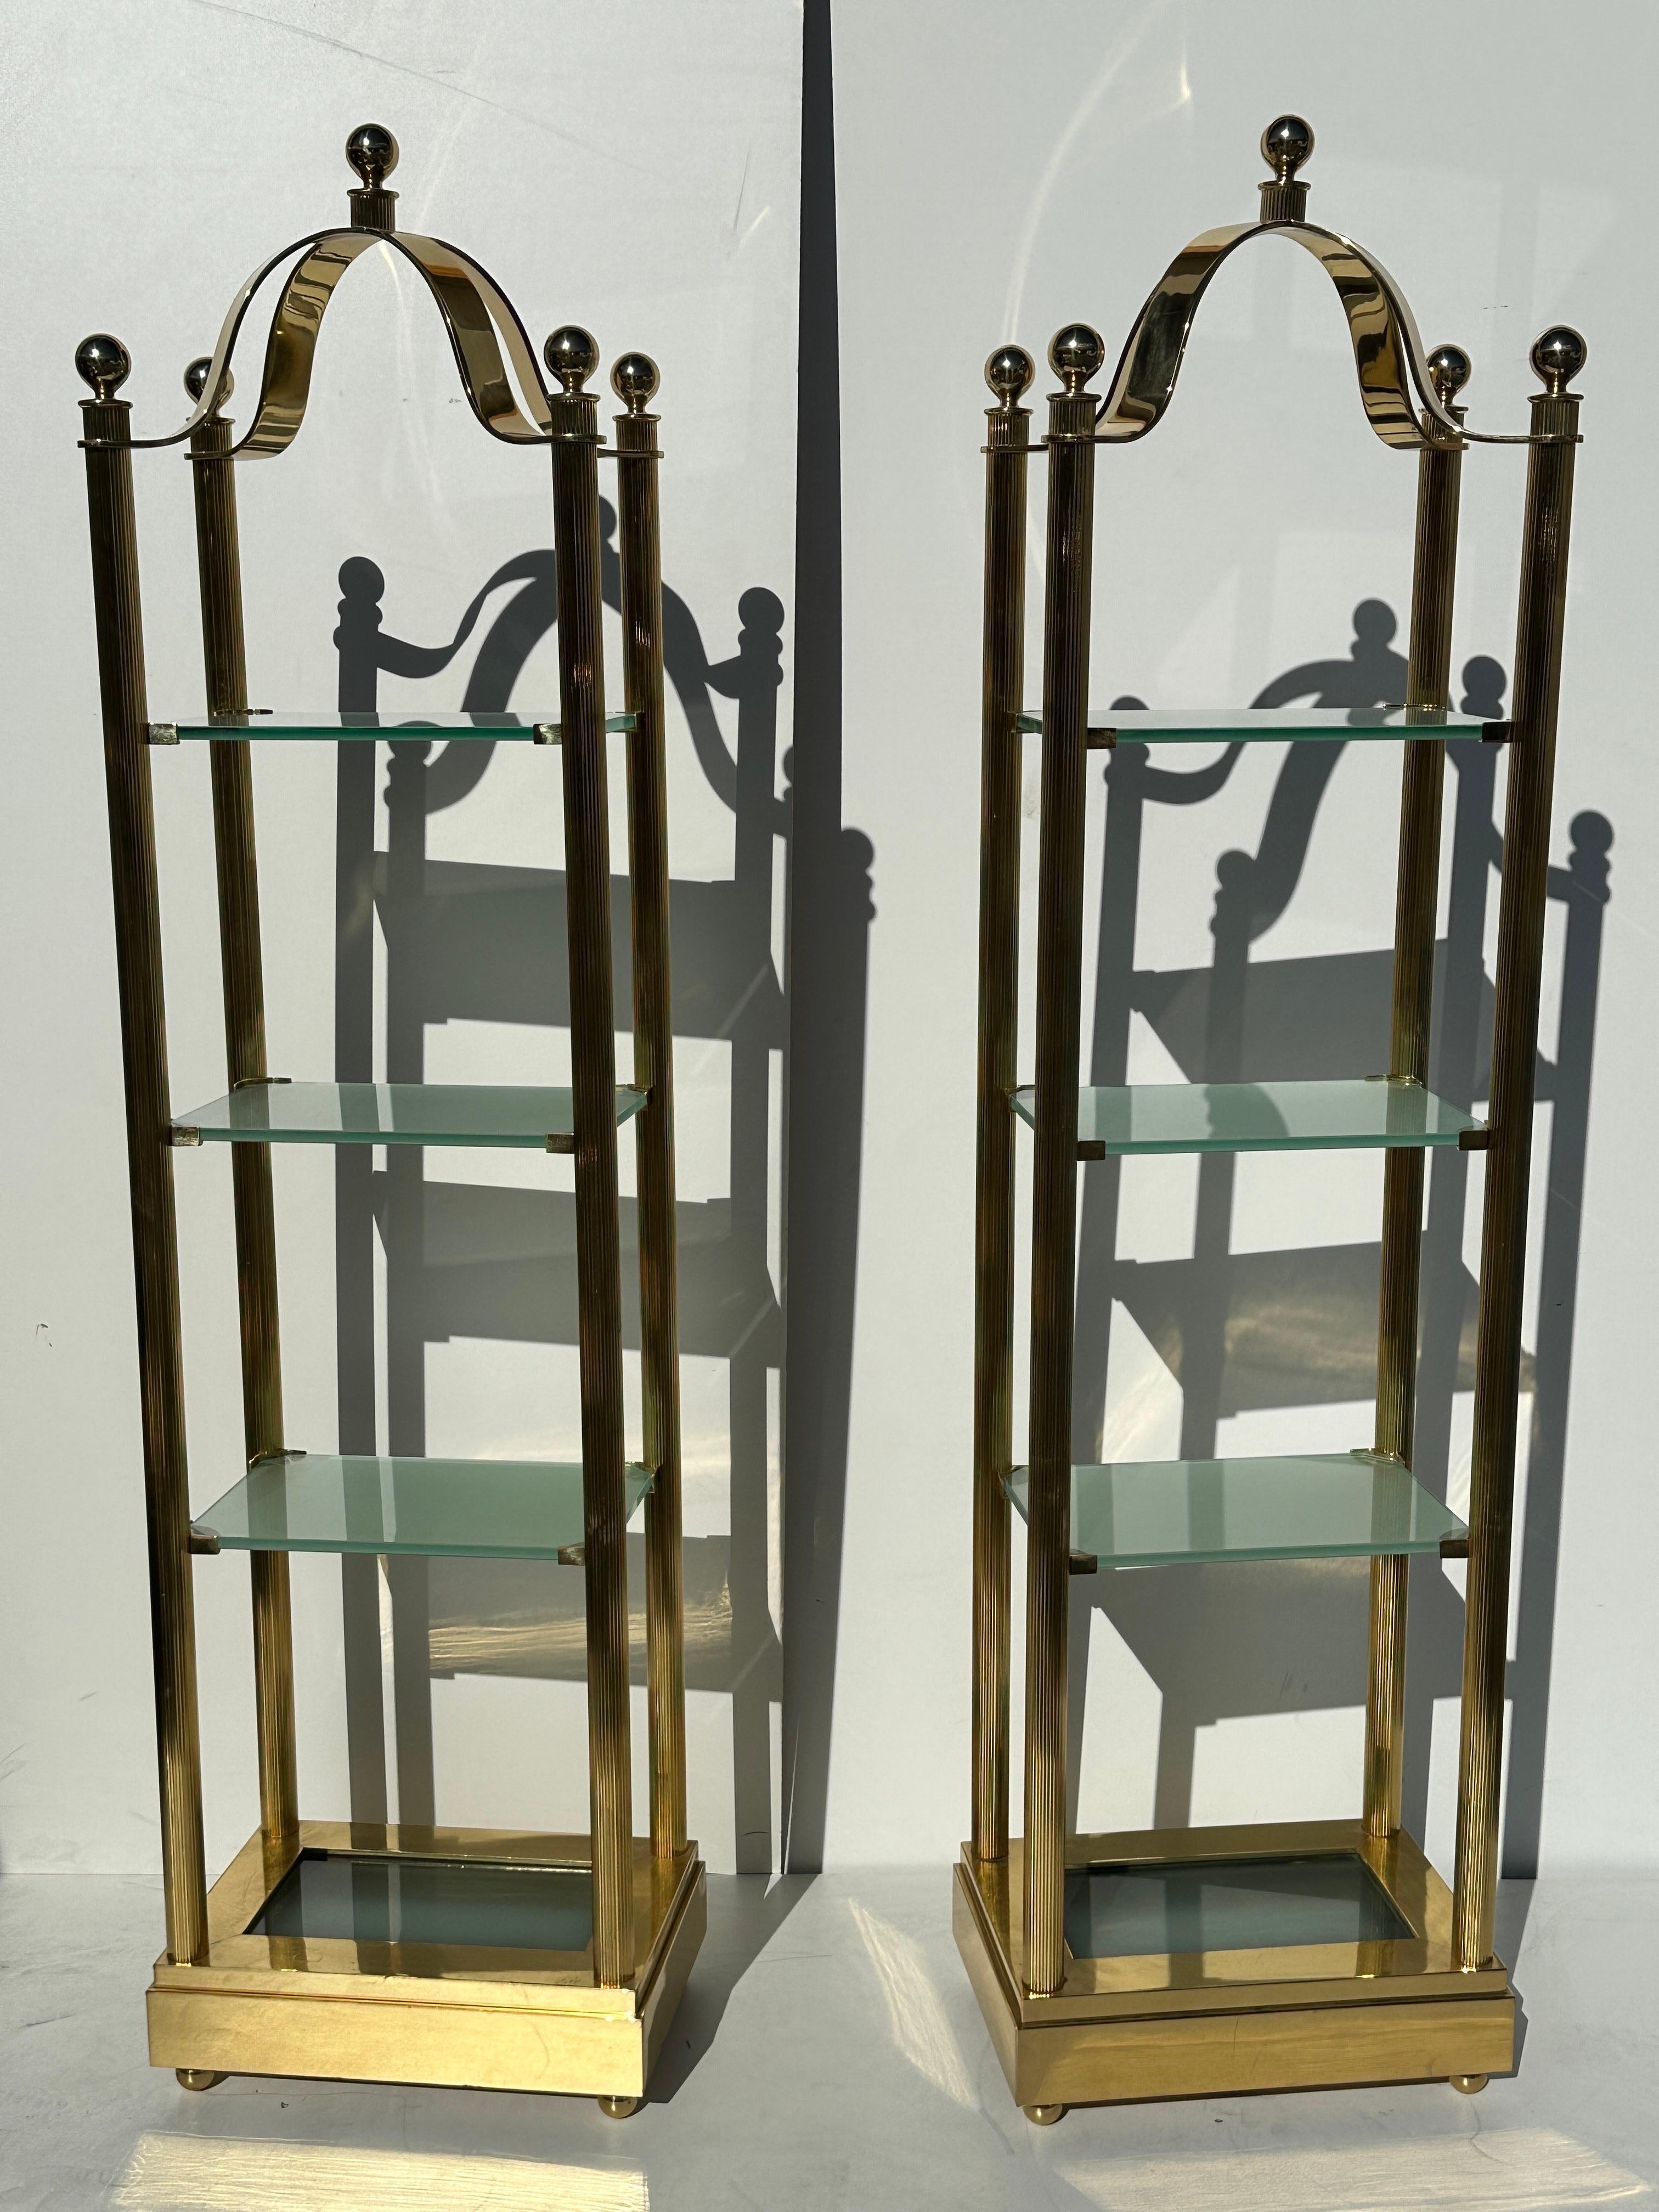 Pair of reeded columnar brass and frosted glass Illuminated etageres.
Clearance between shelves starting from bottom are 15.5